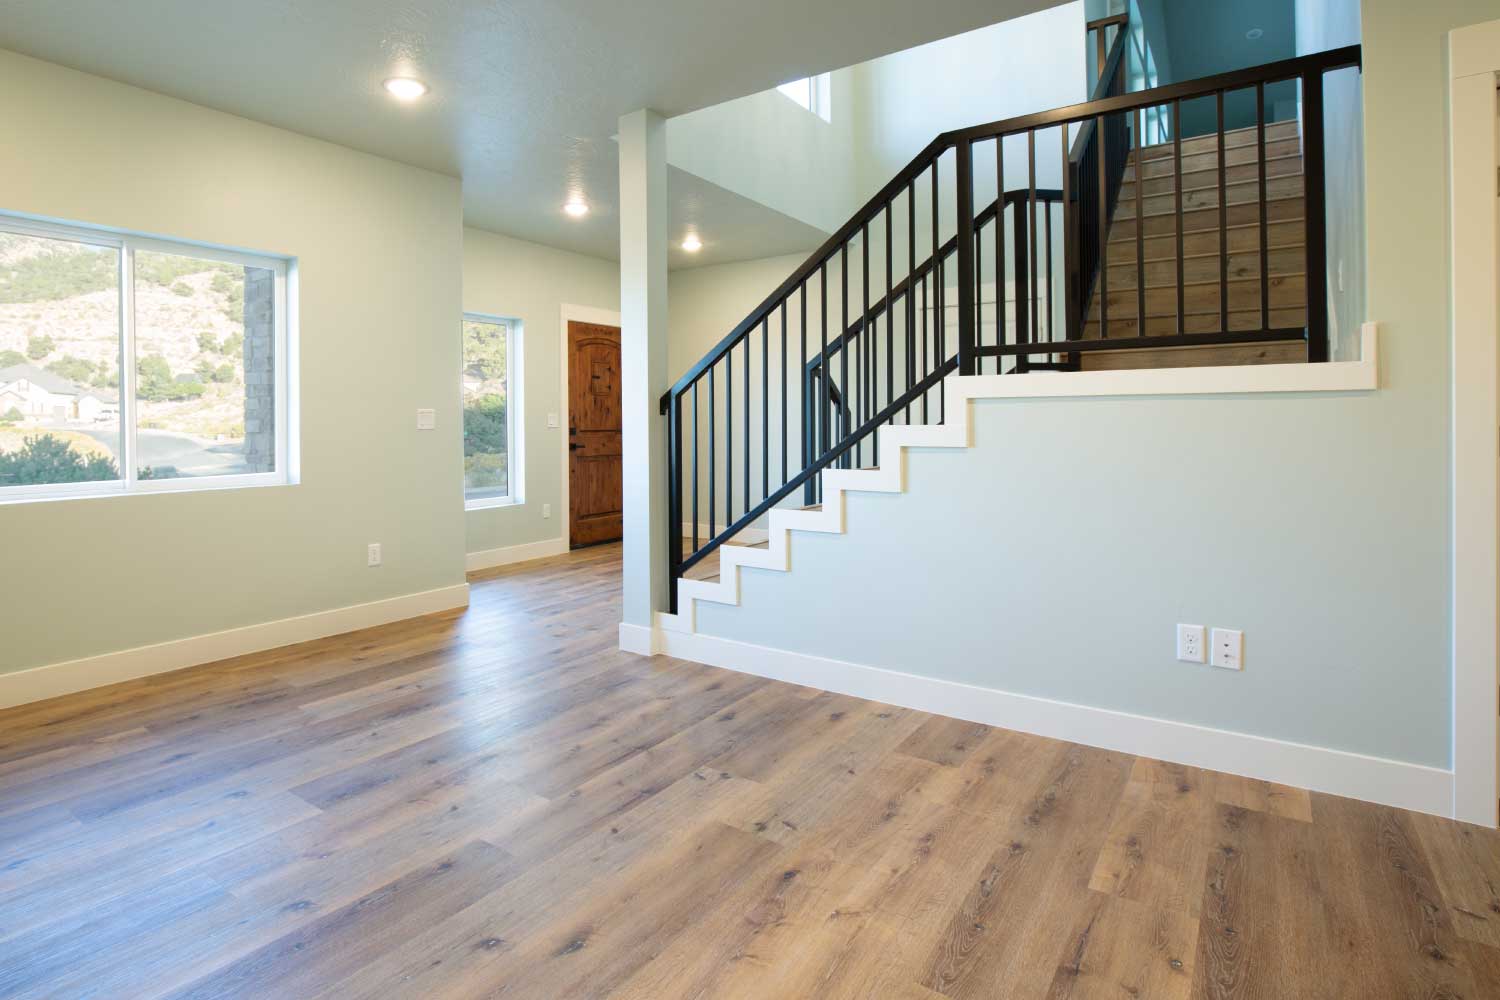 Hardwood floors and staircase with black iron railings